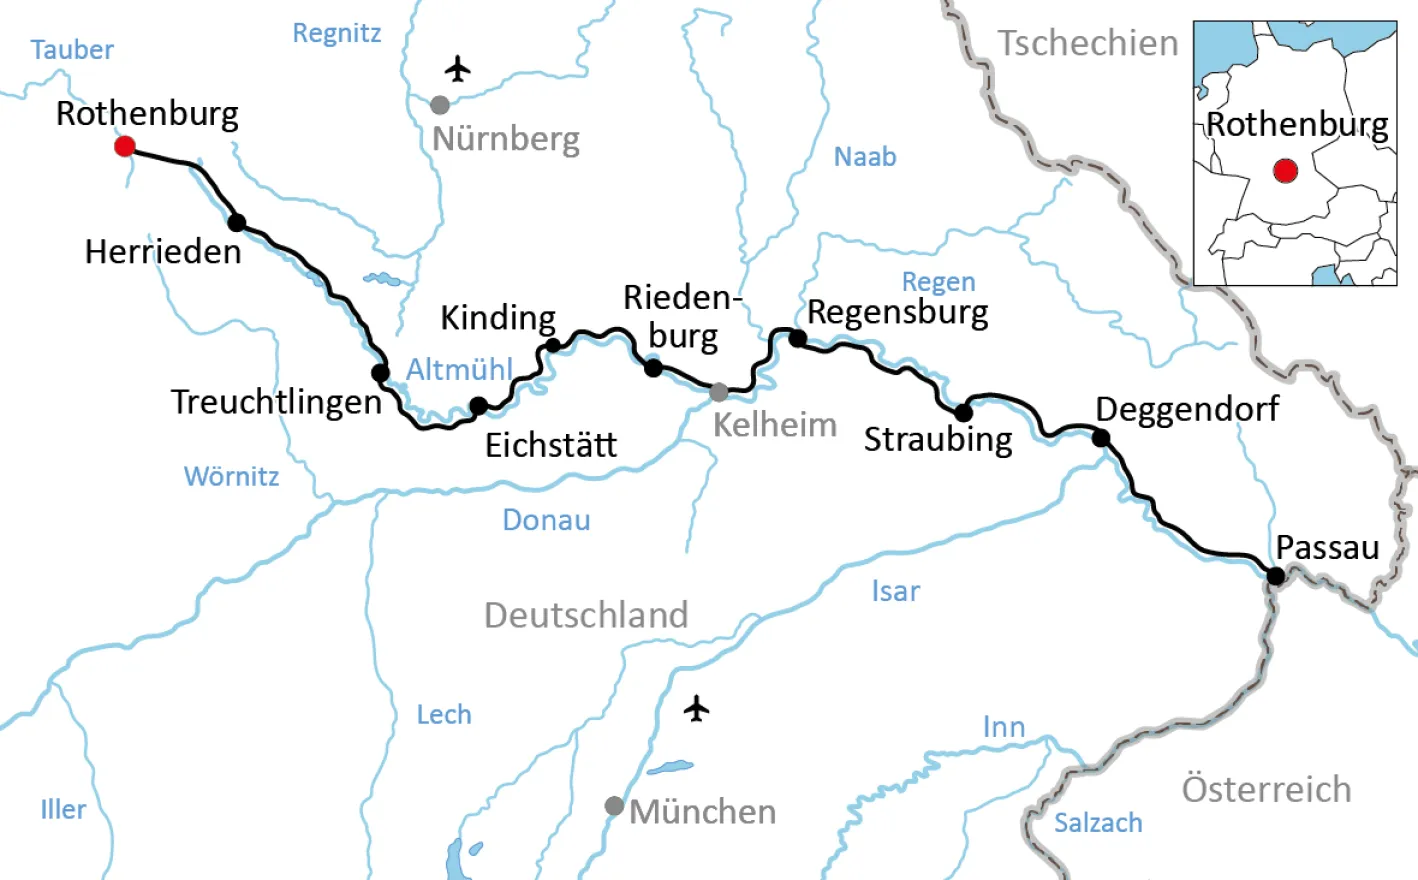 Map for a cycling holiday along Altmühl and Danube